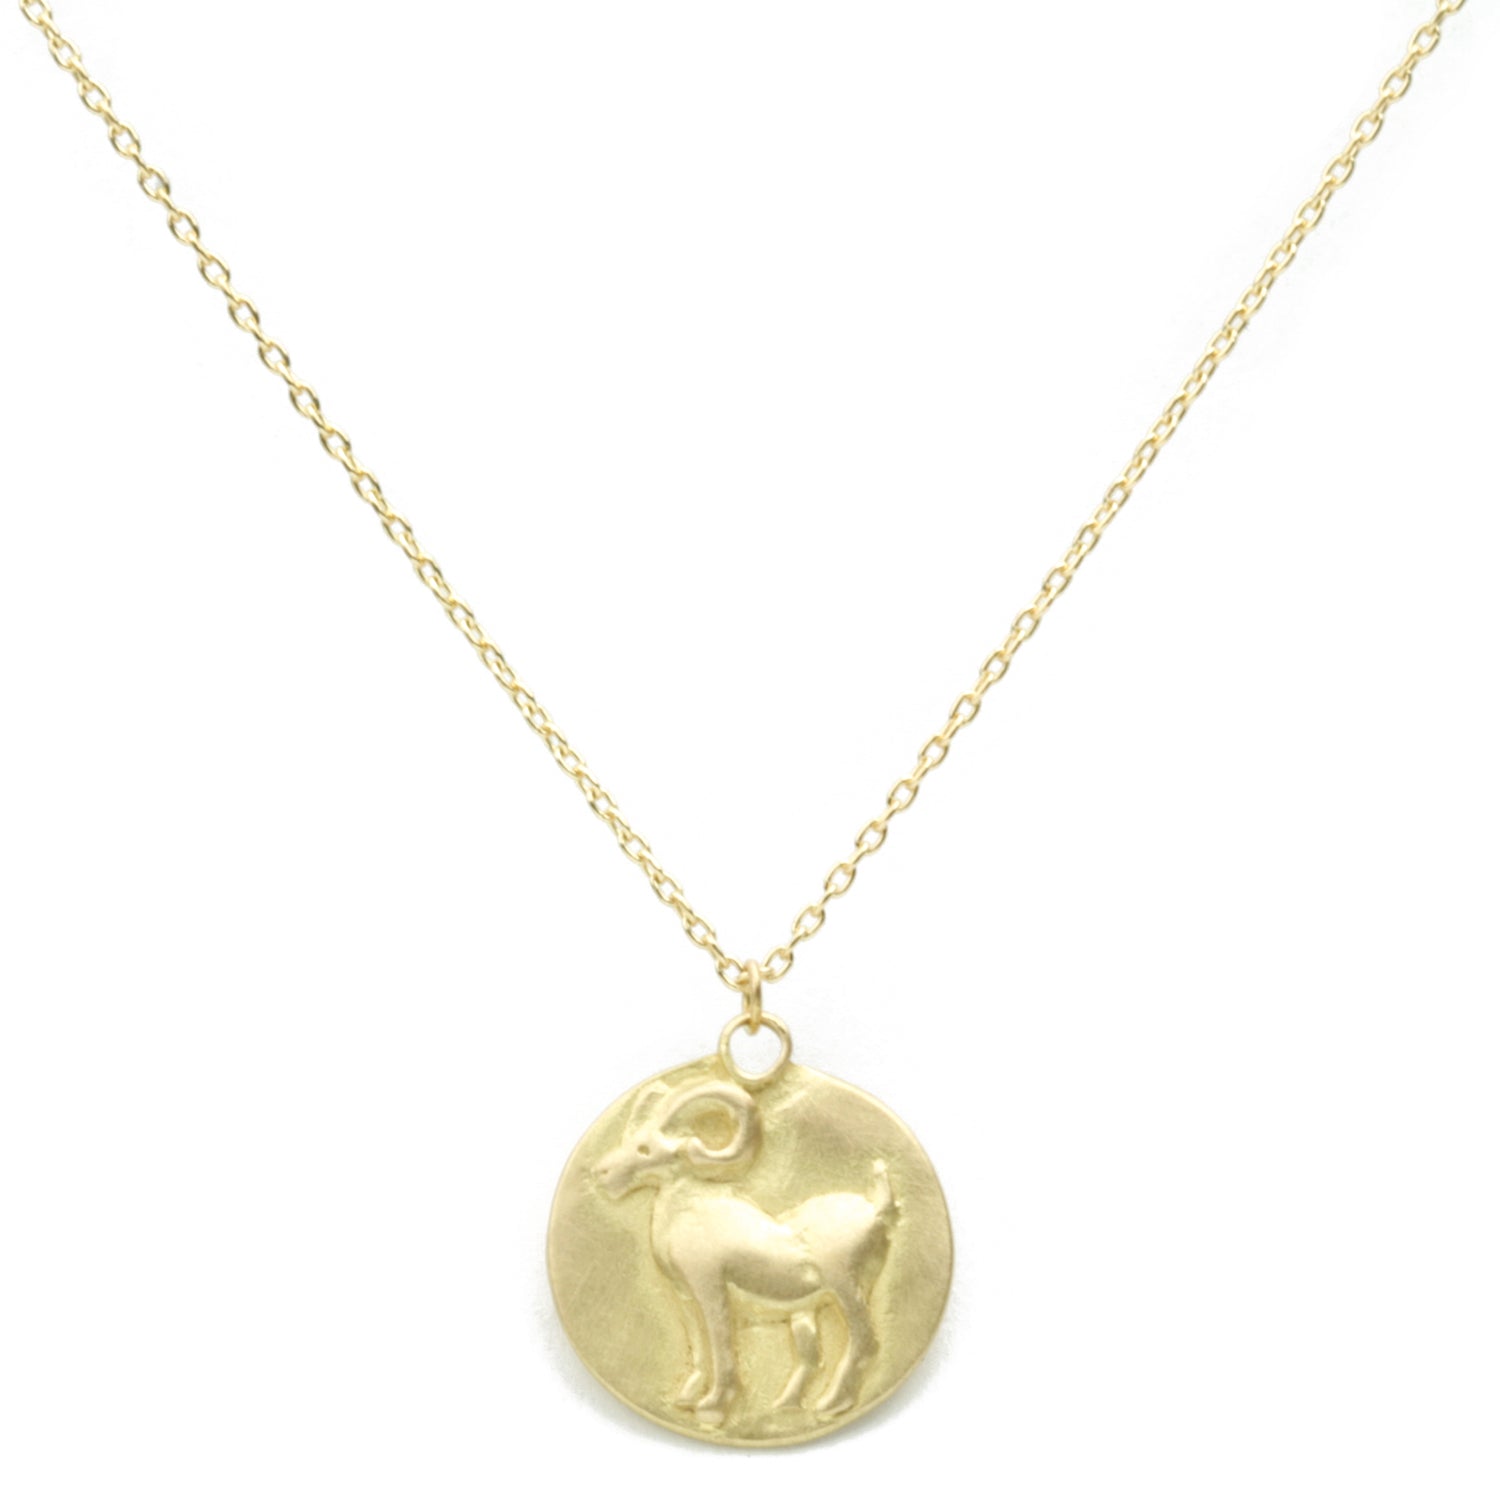 Aries Medal on cable chain